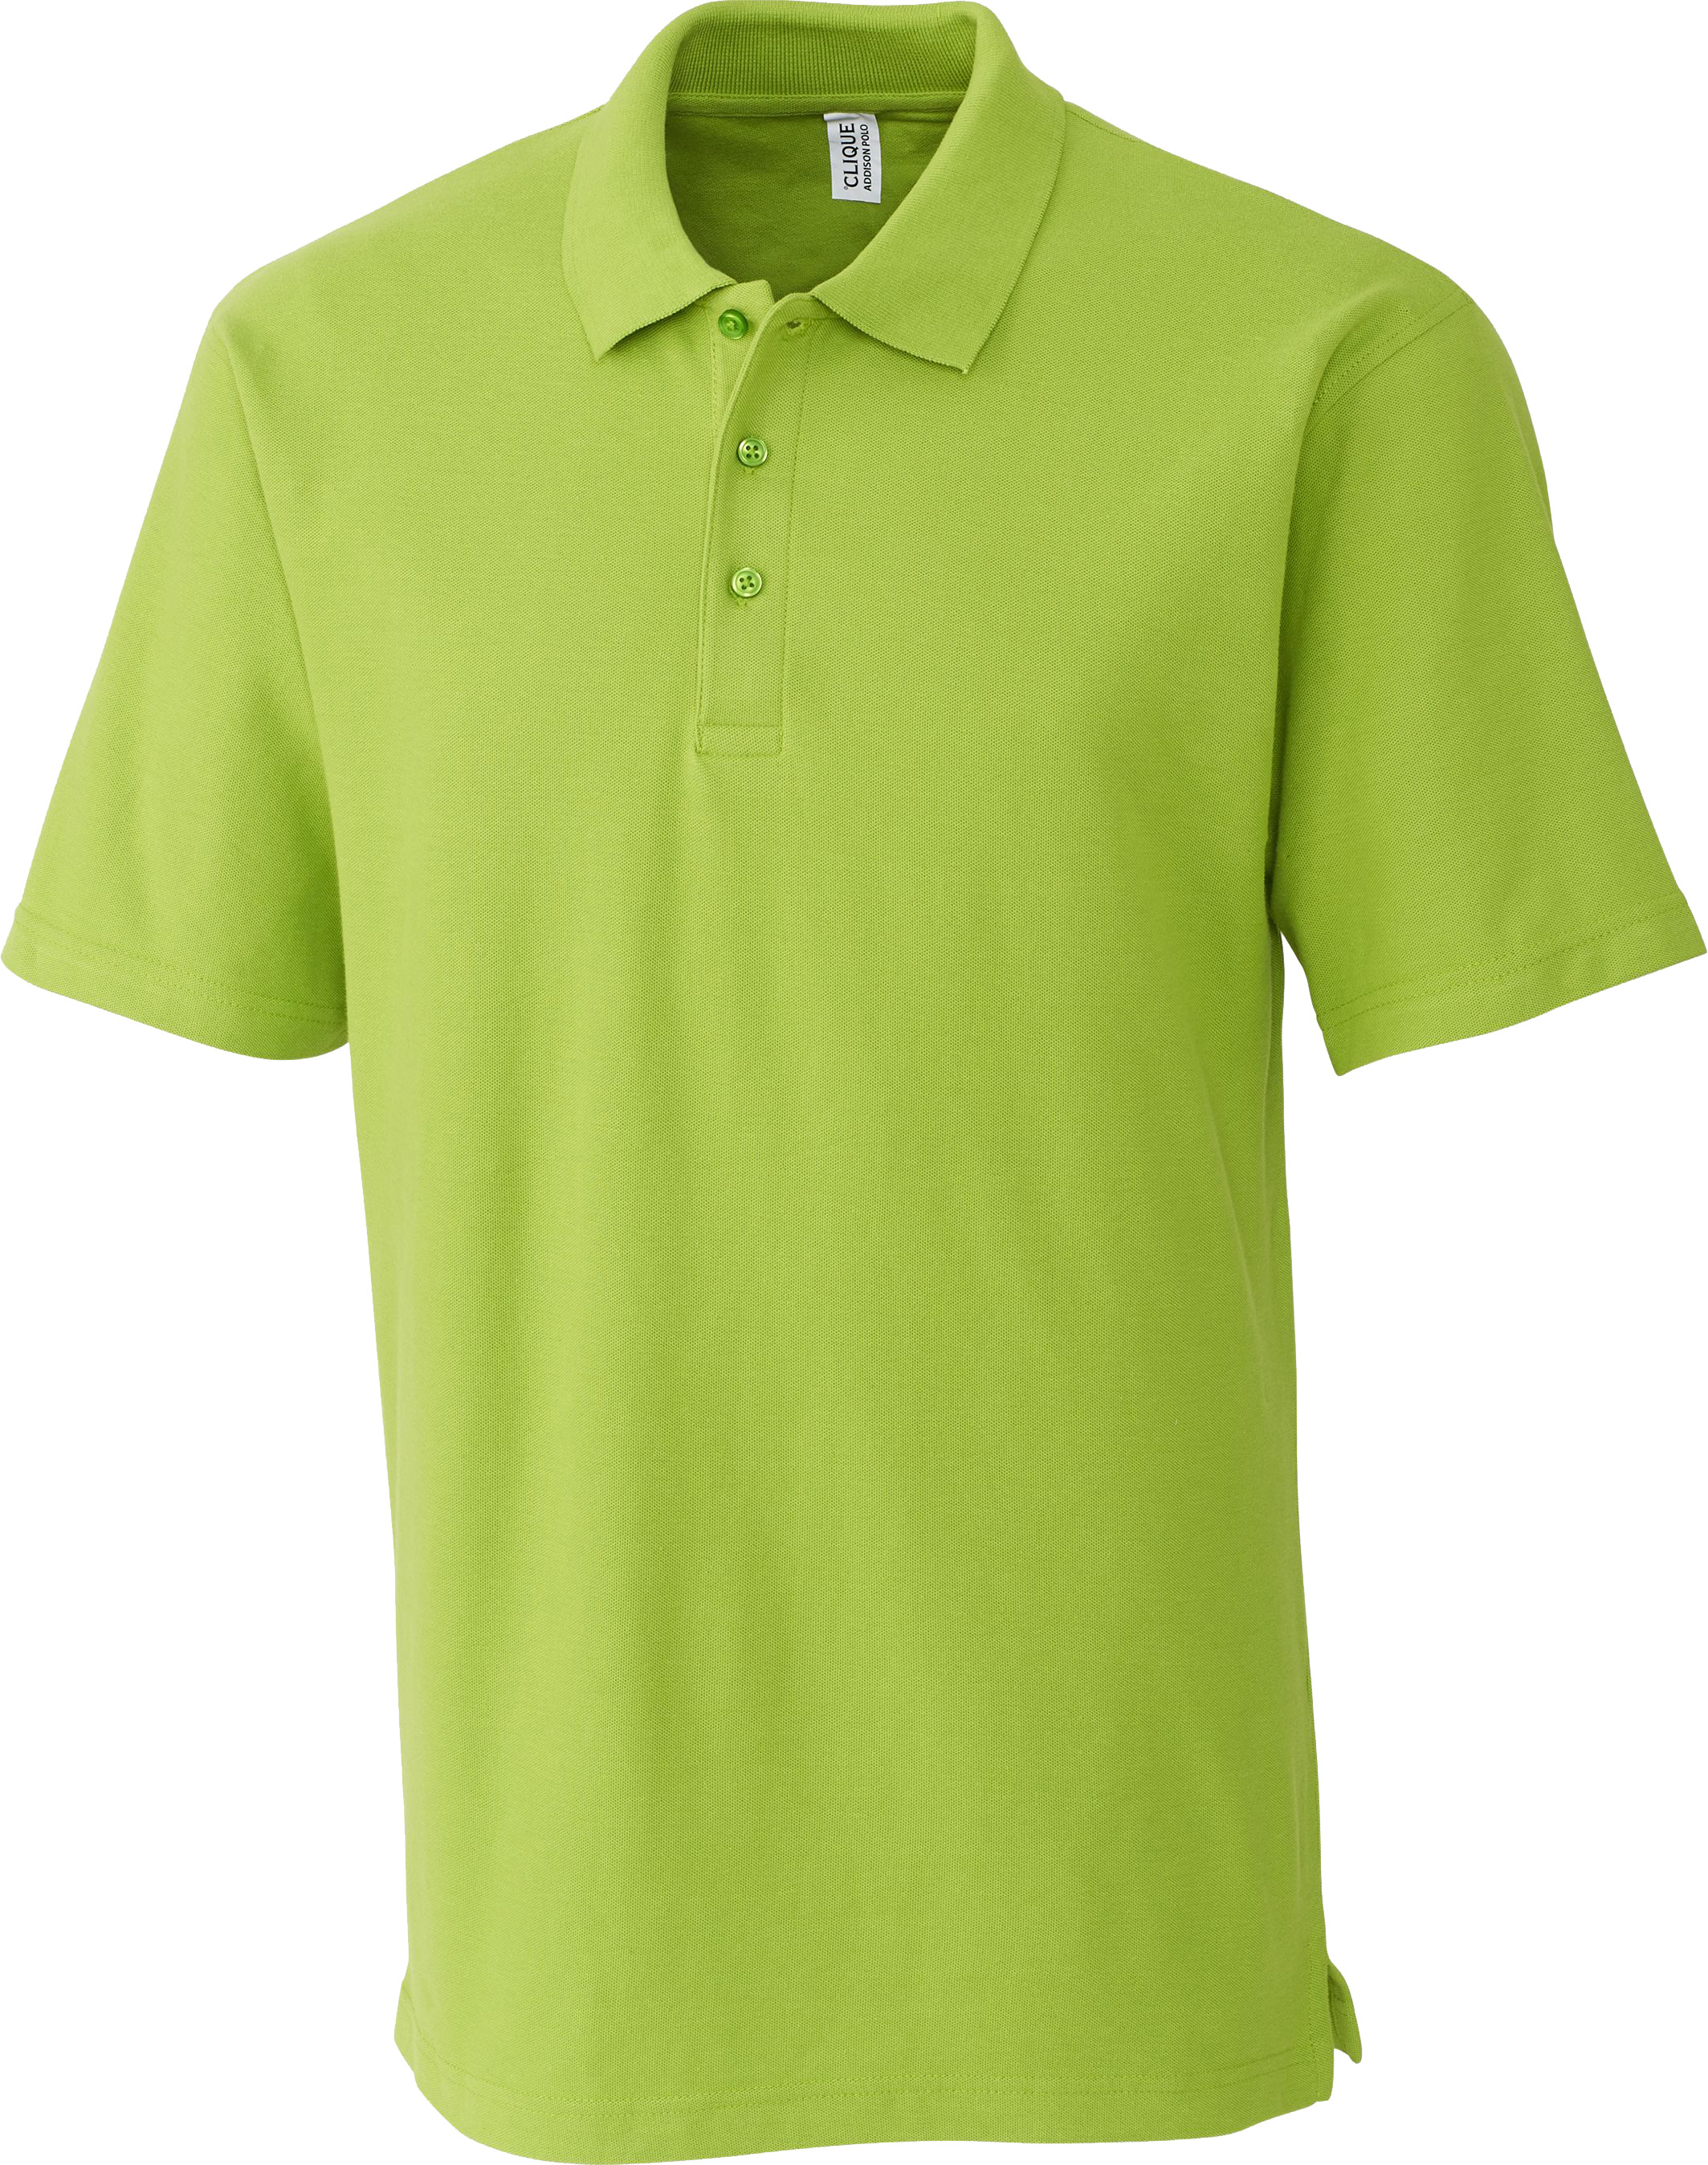 MQK00084 Polo Addison Homme      